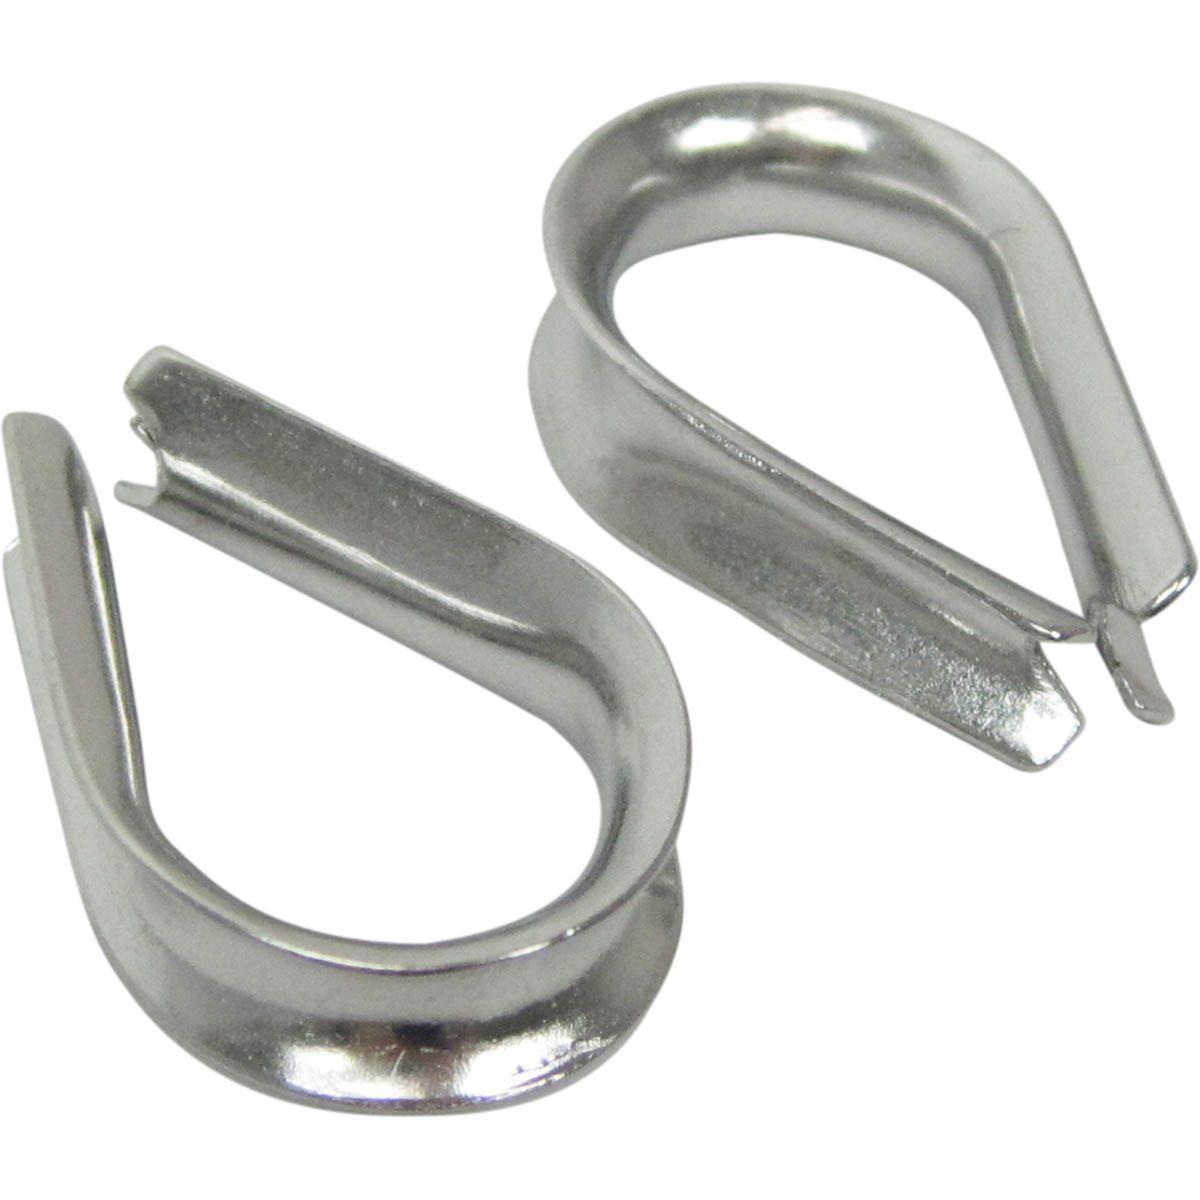 Blueline Stainless Steel Thimble 4mm